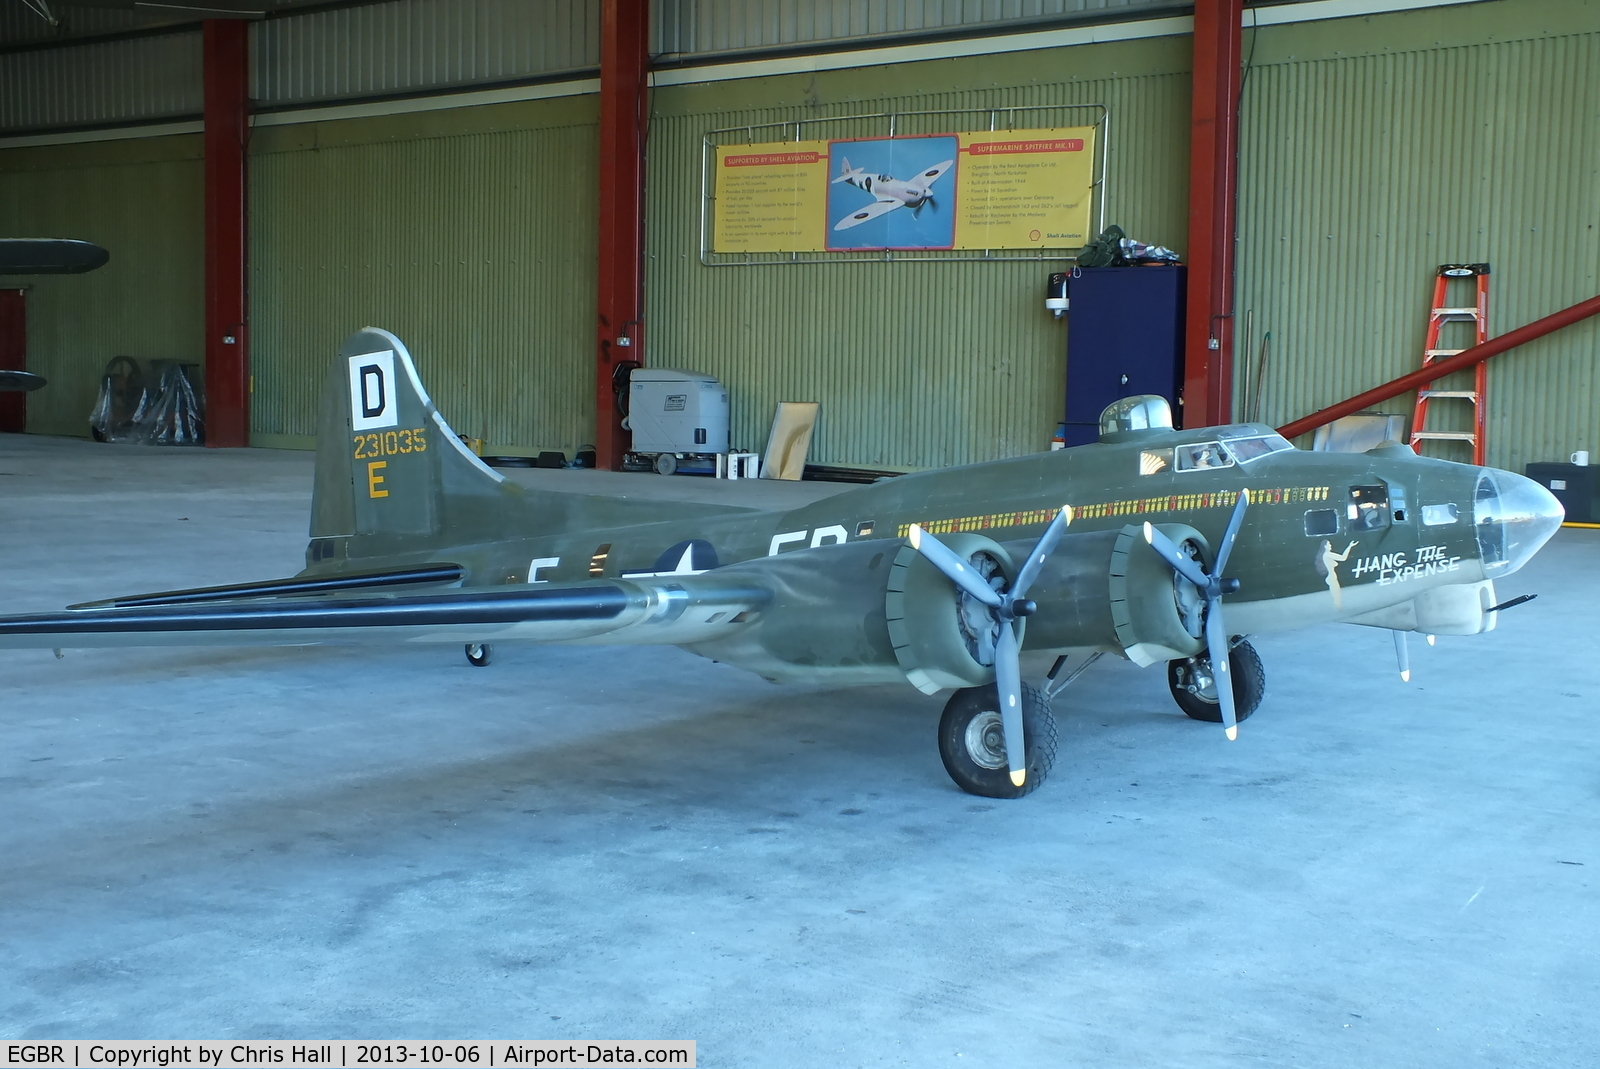 EGBR Airport - large scale model of a B-17 in the hangar at Breighton's Pre Hibernation Fly-in, 2013